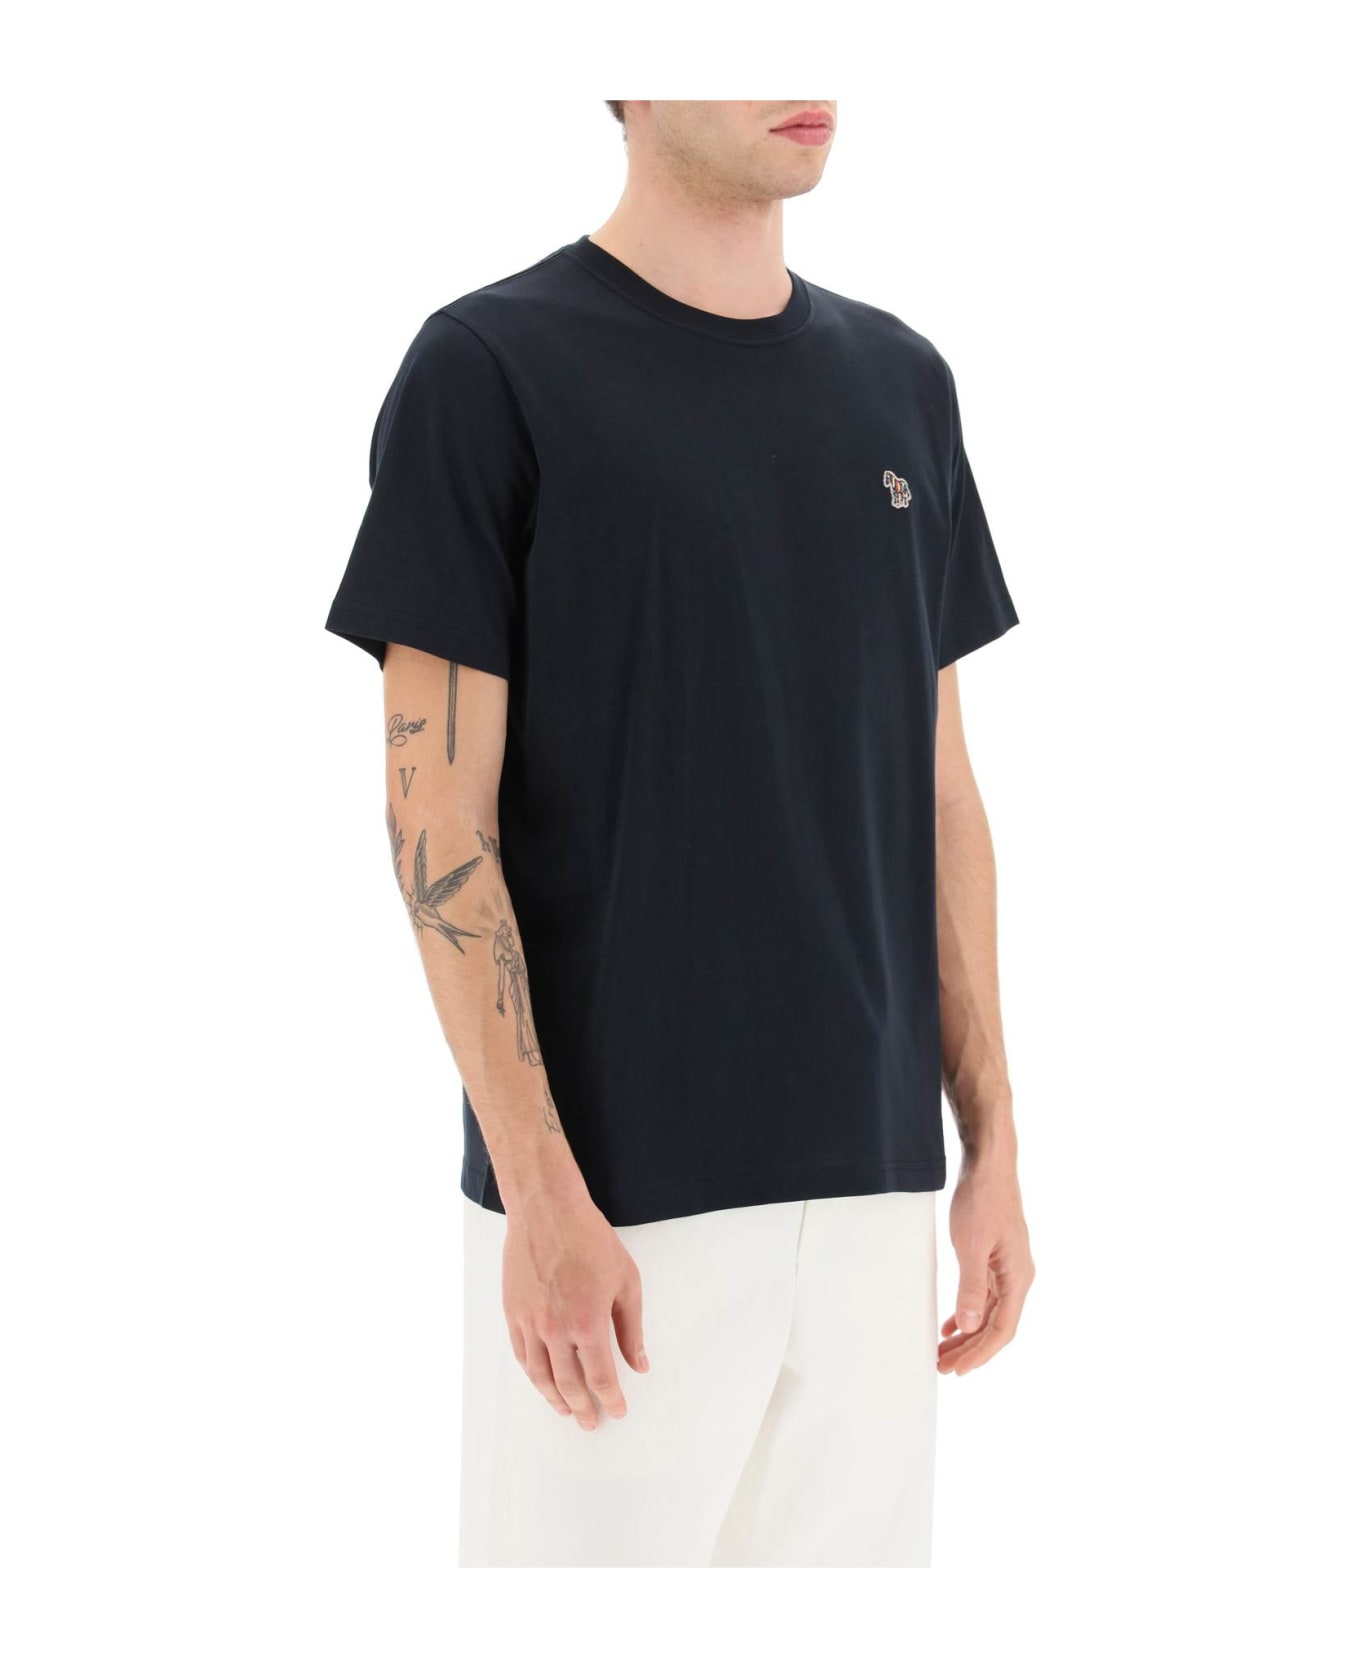 PS by Paul Smith Organic Cotton T-shirt - Blue シャツ